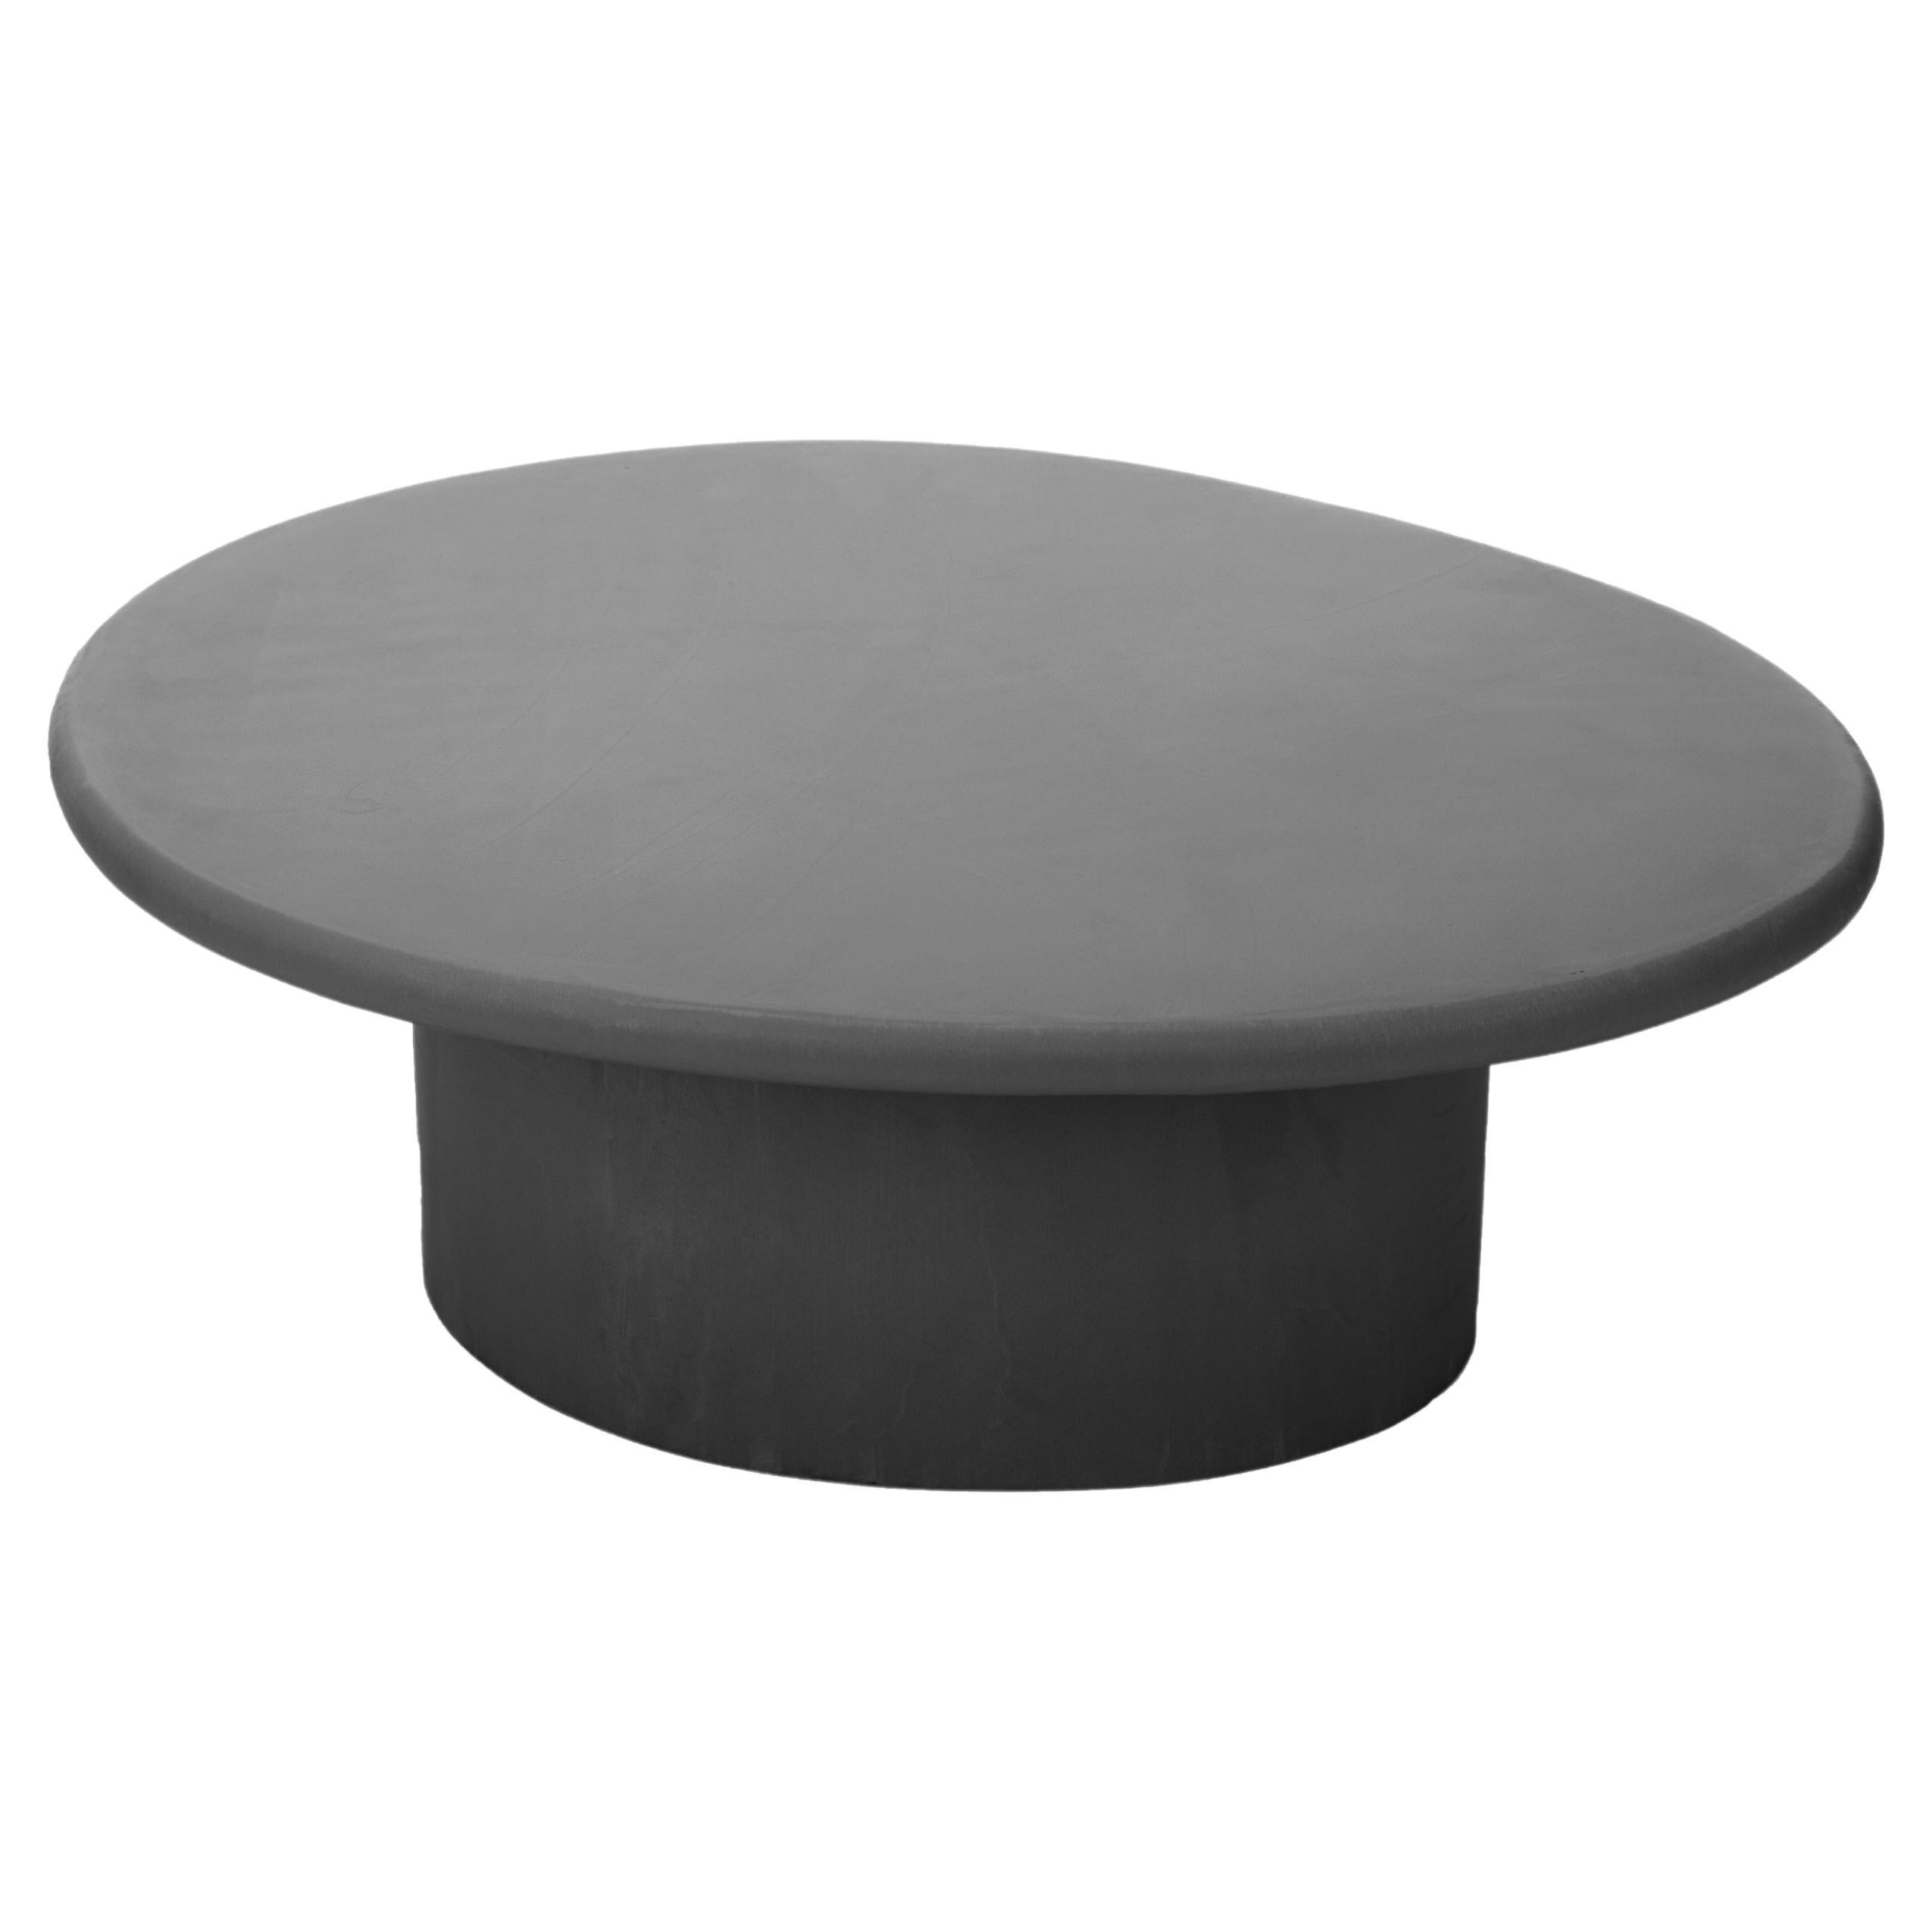 Organic Shaped Mortex Coffee Table "Sami 03" BM57 by Isabelle Beaumont For Sale